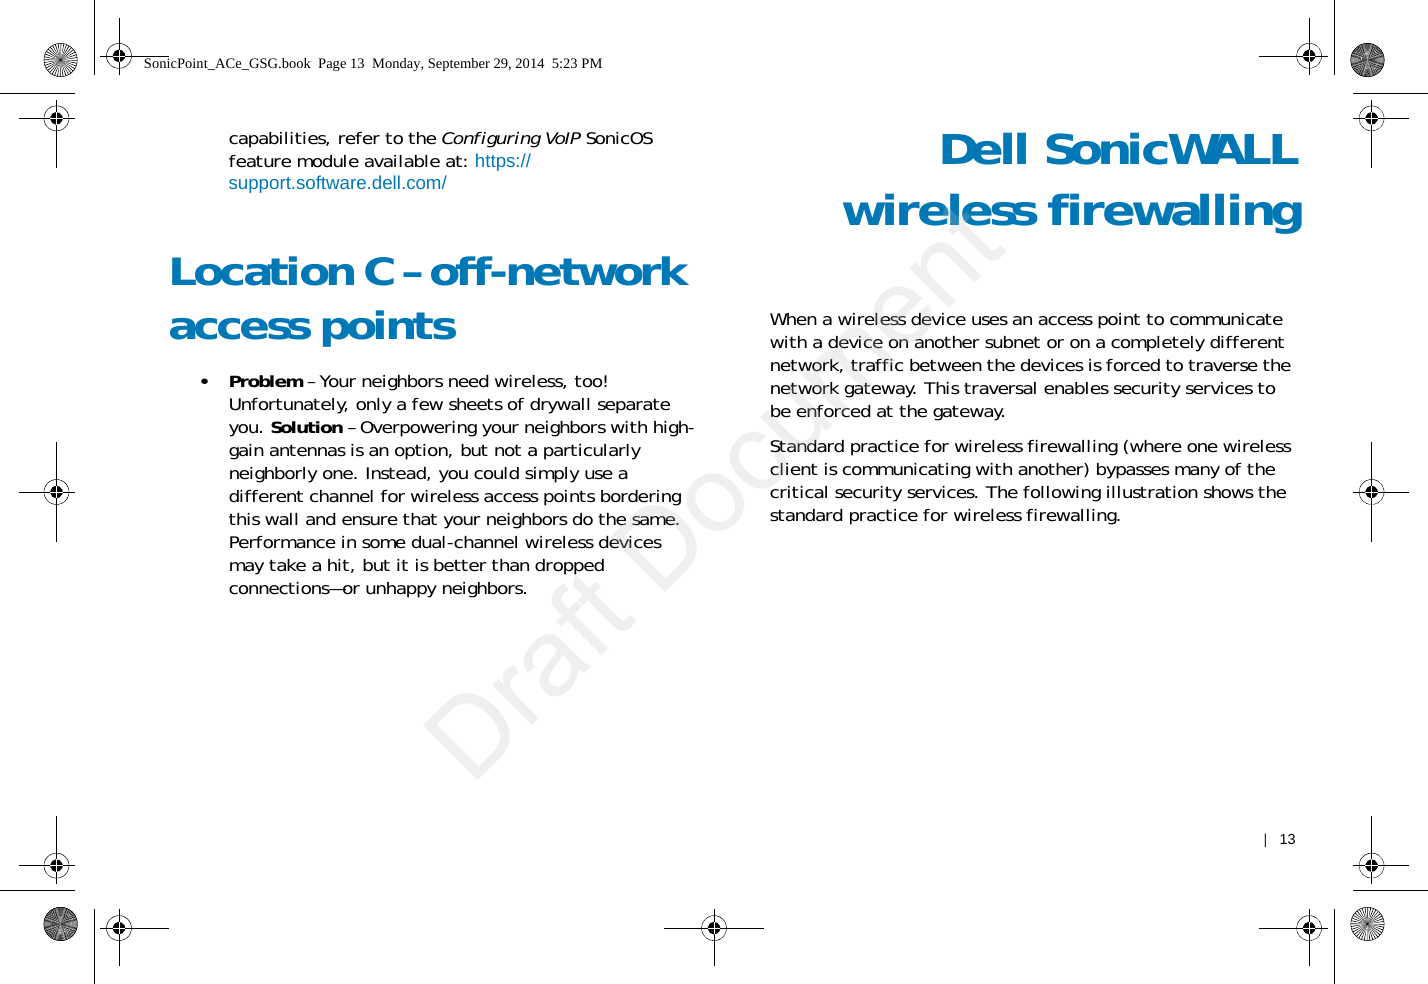    |   13capabilities, refer to the Configuring VoIP SonicOS feature module available at: https://support.software.dell.com/Location C – off-network access points •Problem – Your neighbors need wireless, too! Unfortunately, only a few sheets of drywall separate you. Solution – Overpowering your neighbors with high-gain antennas is an option, but not a particularly neighborly one. Instead, you could simply use a different channel for wireless access points bordering this wall and ensure that your neighbors do the same. Performance in some dual-channel wireless devices may take a hit, but it is better than dropped connections—or unhappy neighbors.Dell SonicWALLwireless firewallingWhen a wireless device uses an access point to communicate with a device on another subnet or on a completely different network, traffic between the devices is forced to traverse the network gateway. This traversal enables security services to be enforced at the gateway.Standard practice for wireless firewalling (where one wireless client is communicating with another) bypasses many of the critical security services. The following illustration shows the standard practice for wireless firewalling. SonicPoint_ACe_GSG.book  Page 13  Monday, September 29, 2014  5:23 PMDraft Document